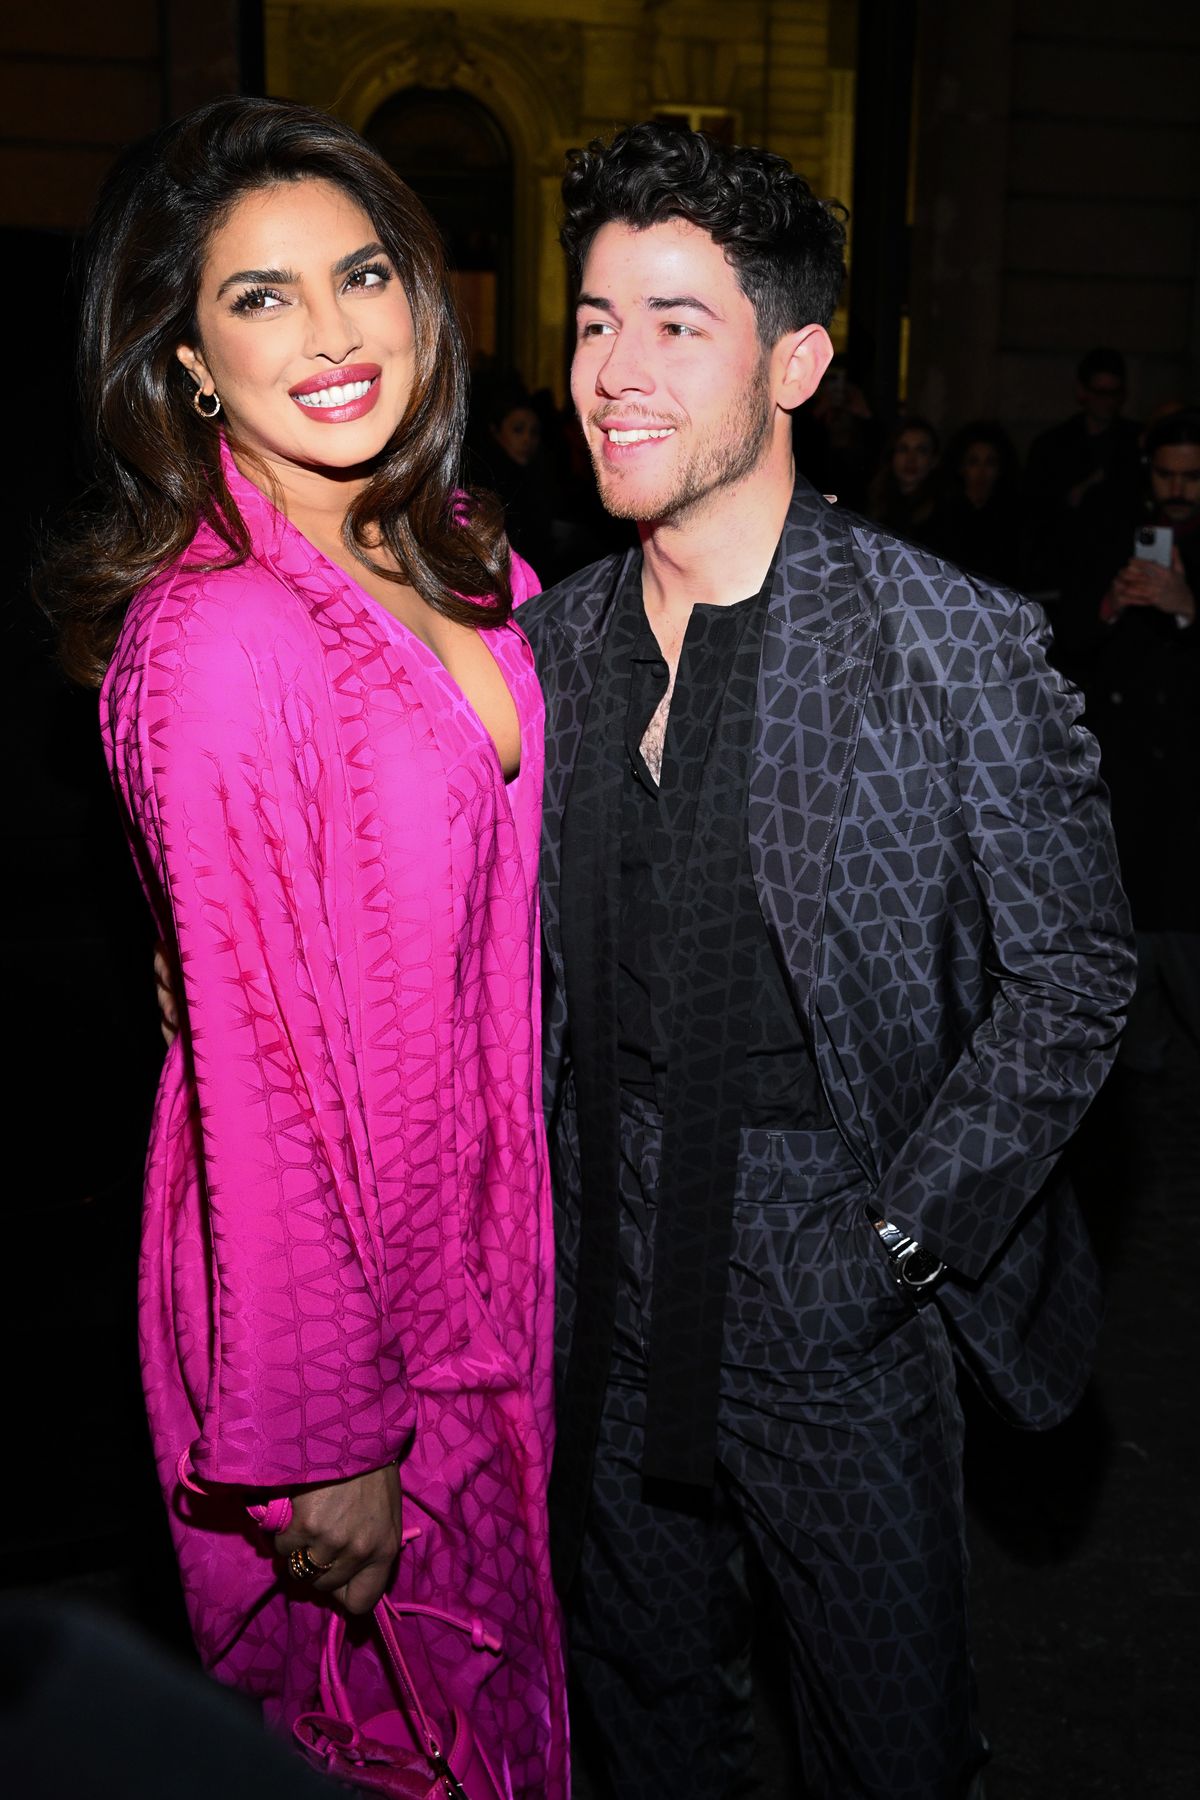 paris, france march 05 priyanka chopra and nick jonas attend the valentino womenswear fall winter 2023 2024 show as part of paris fashion week on march 05, 2023 in paris, france photo by stephane cardinale corbiscorbis via getty images